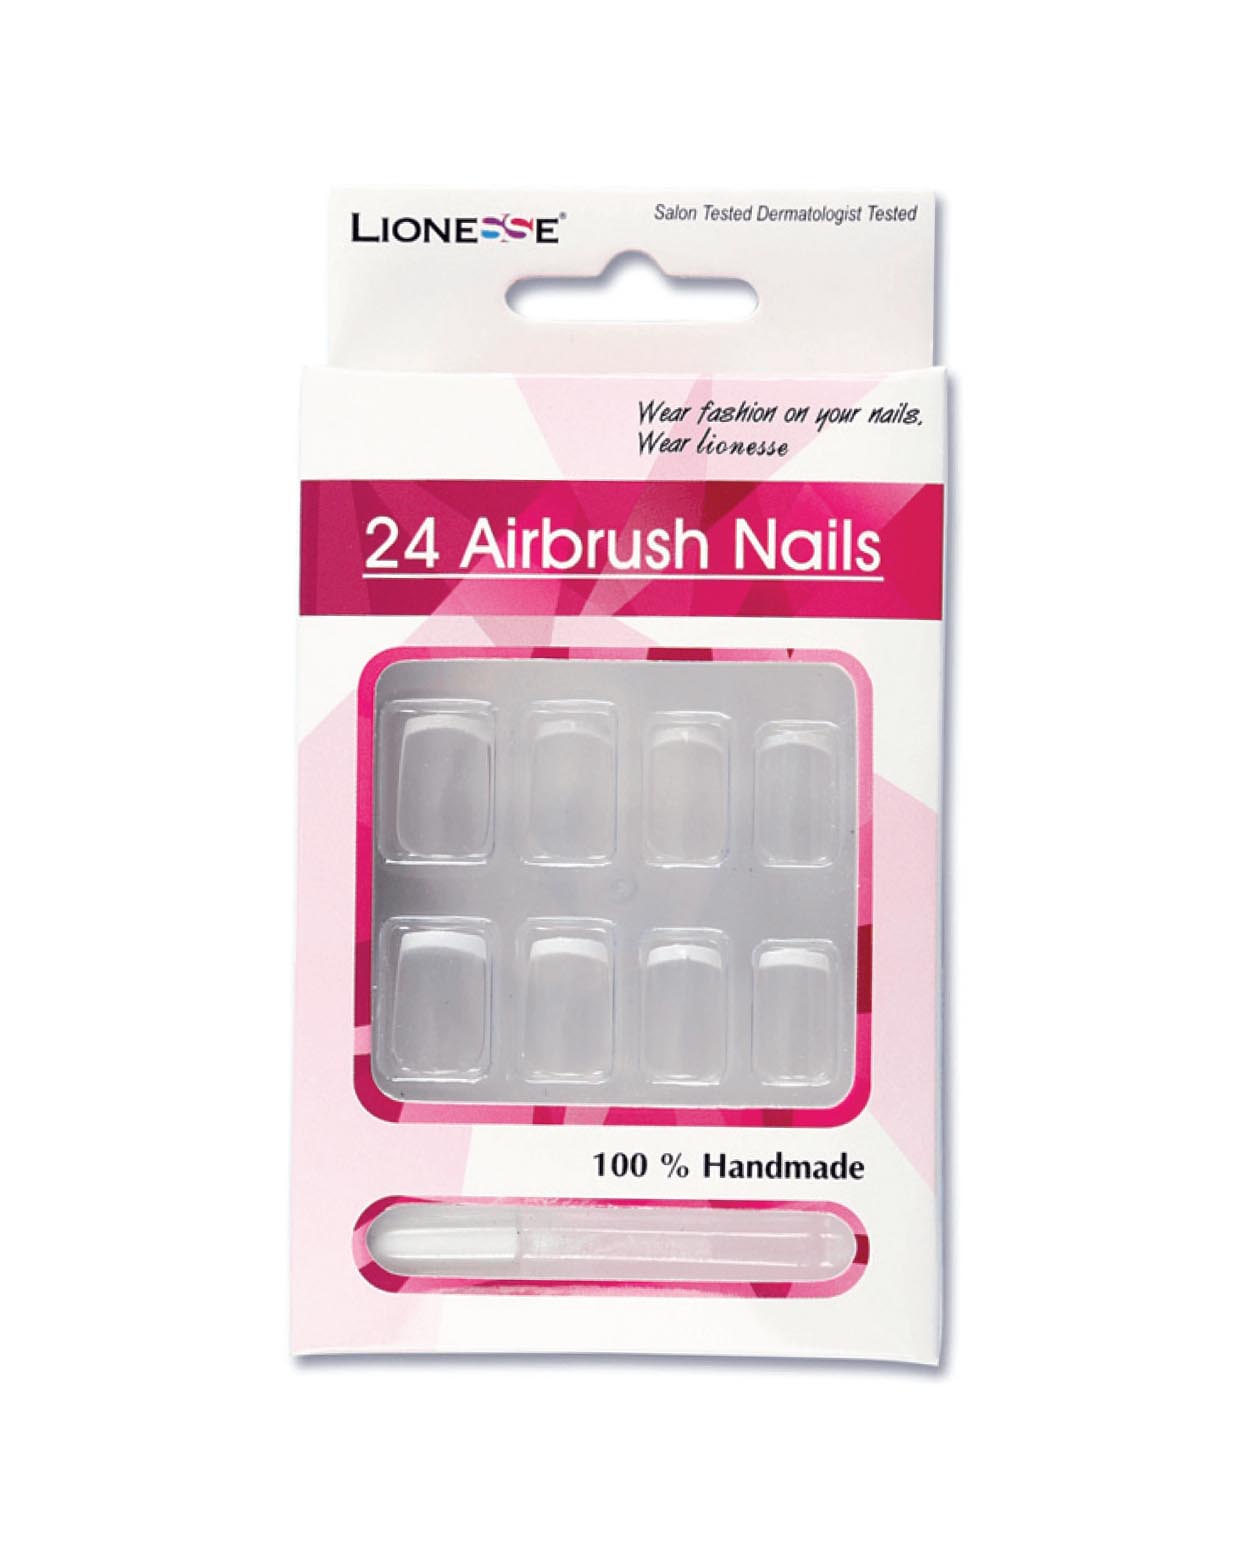 LIONESSE - 24 Airbrush Nails